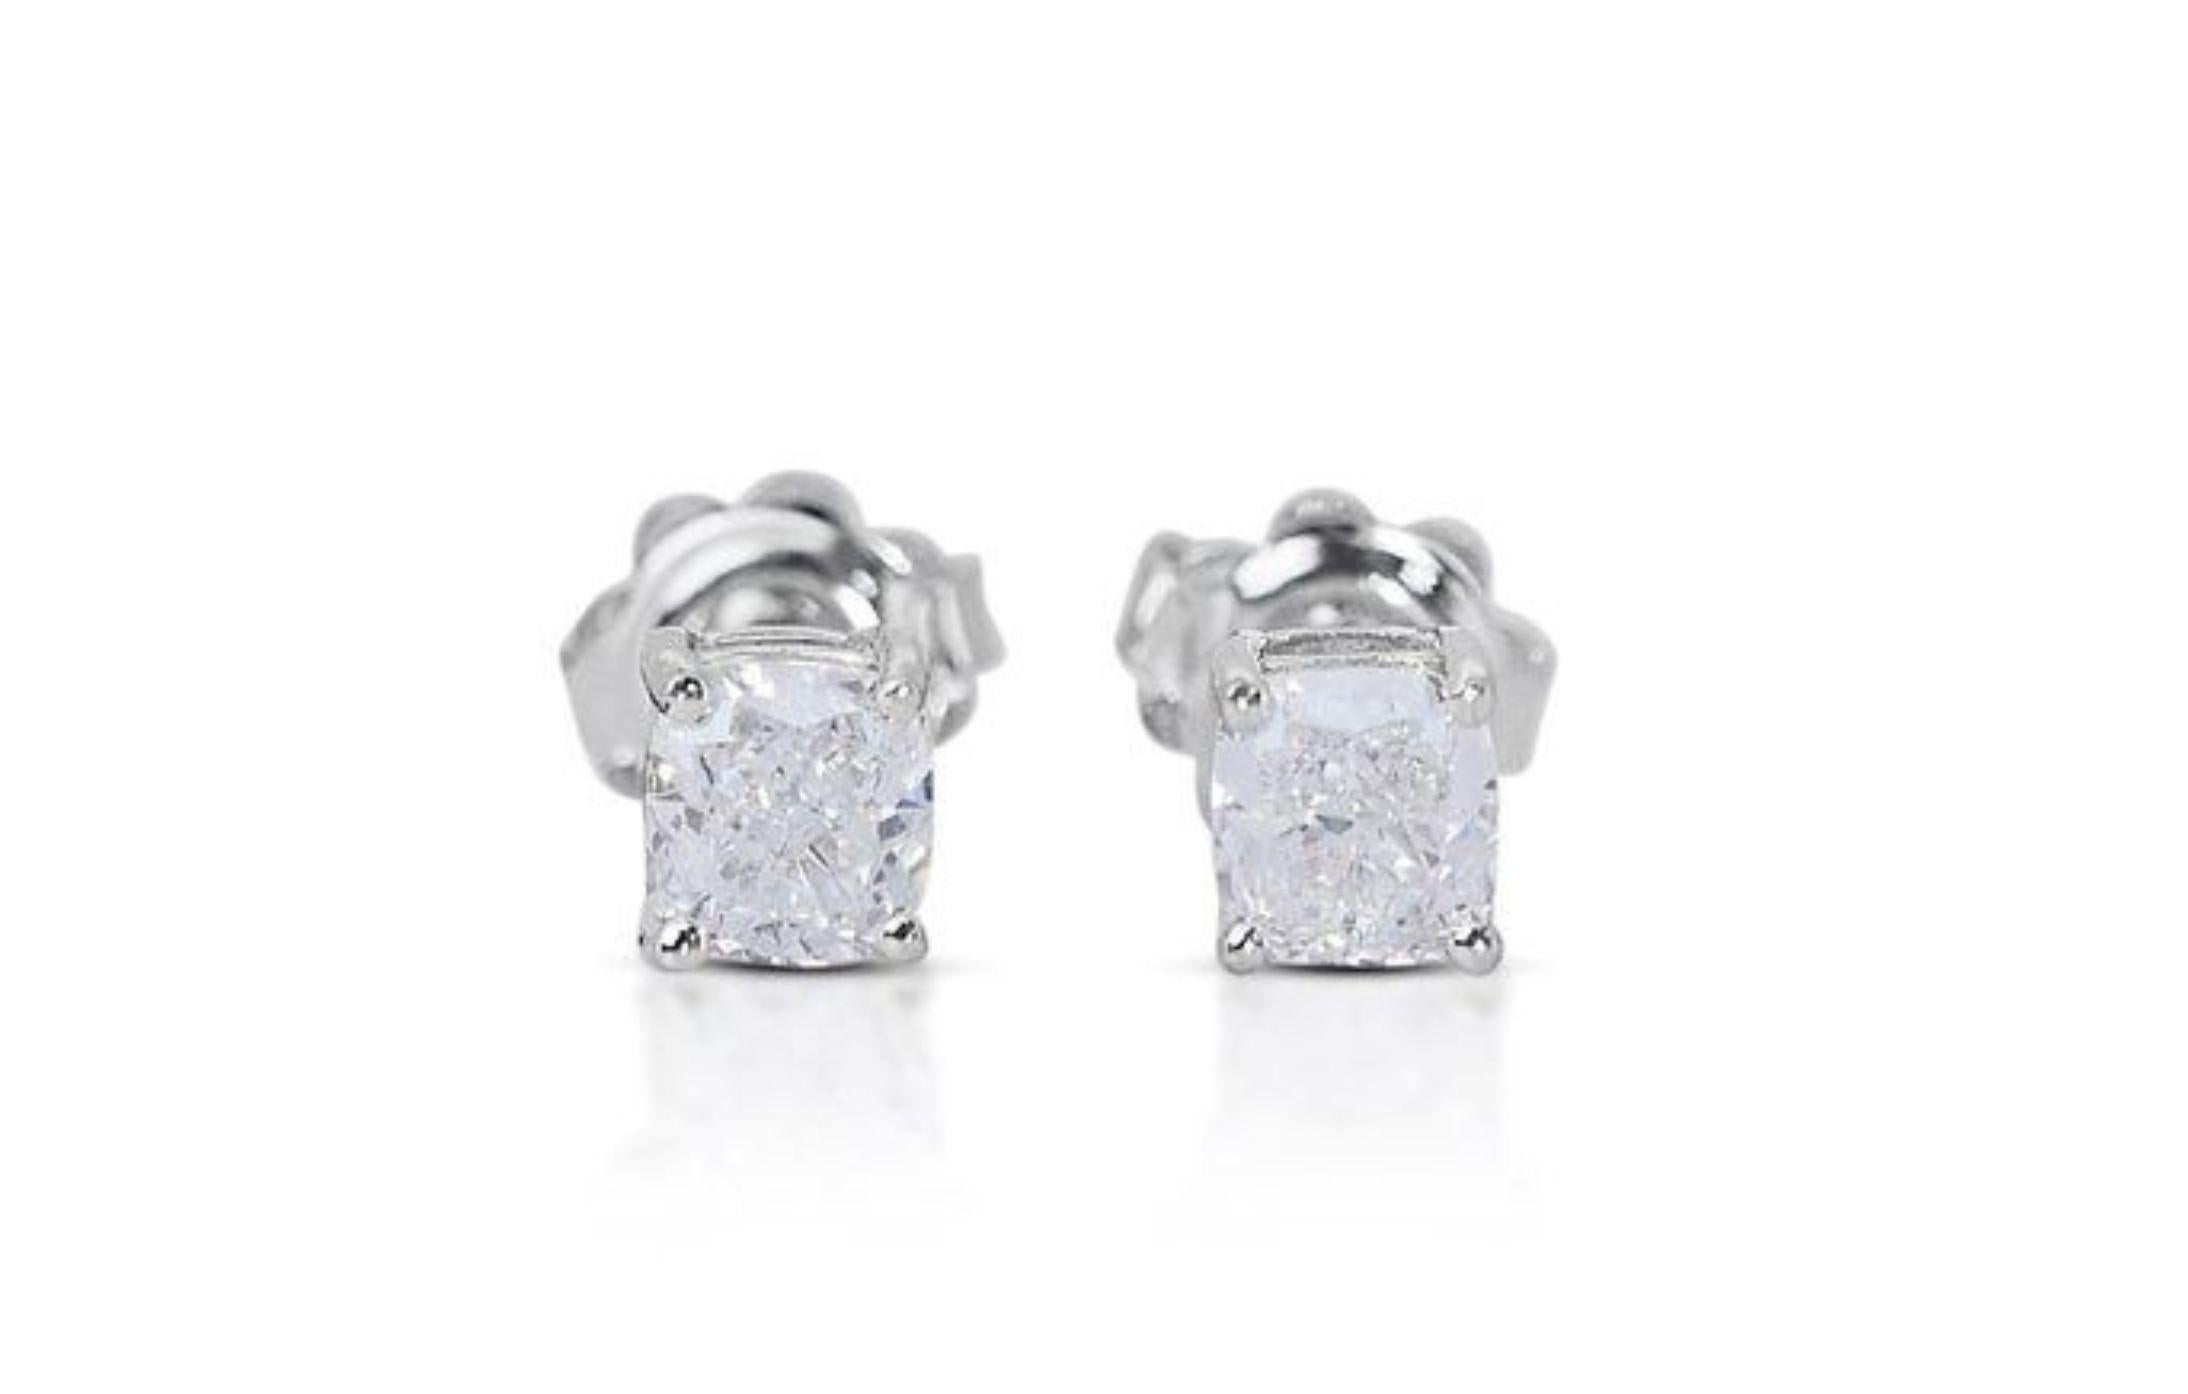 Stunning 1.40ct Cushion Modified Diamond Earrings set in 18K White Gold For Sale 2